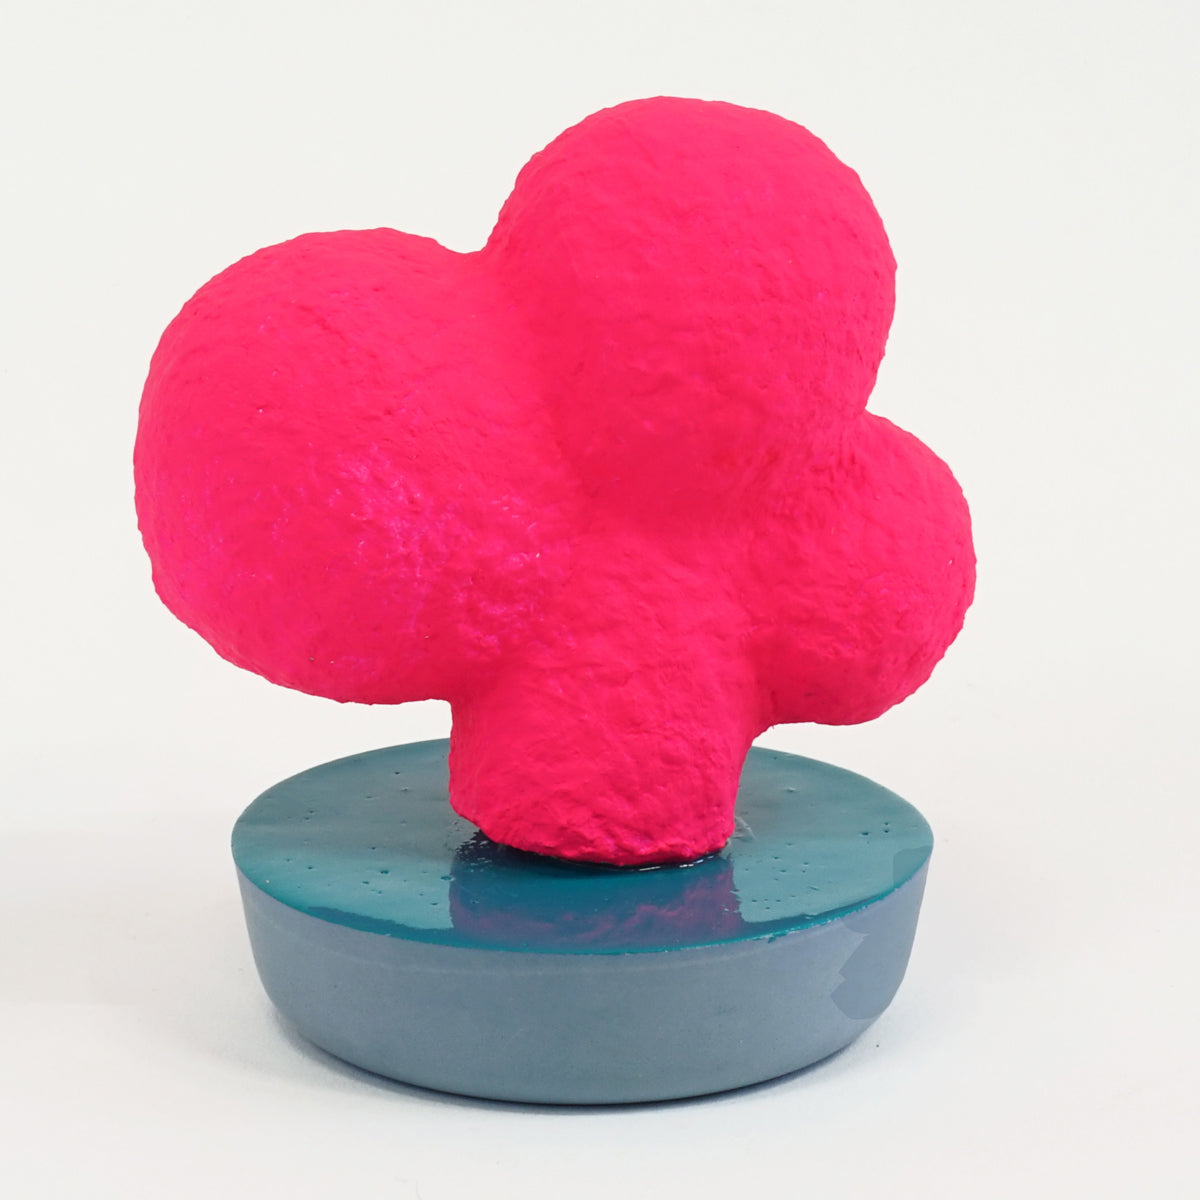 CHIAOZZA abstract biomorphic sculpture - pink on blue base